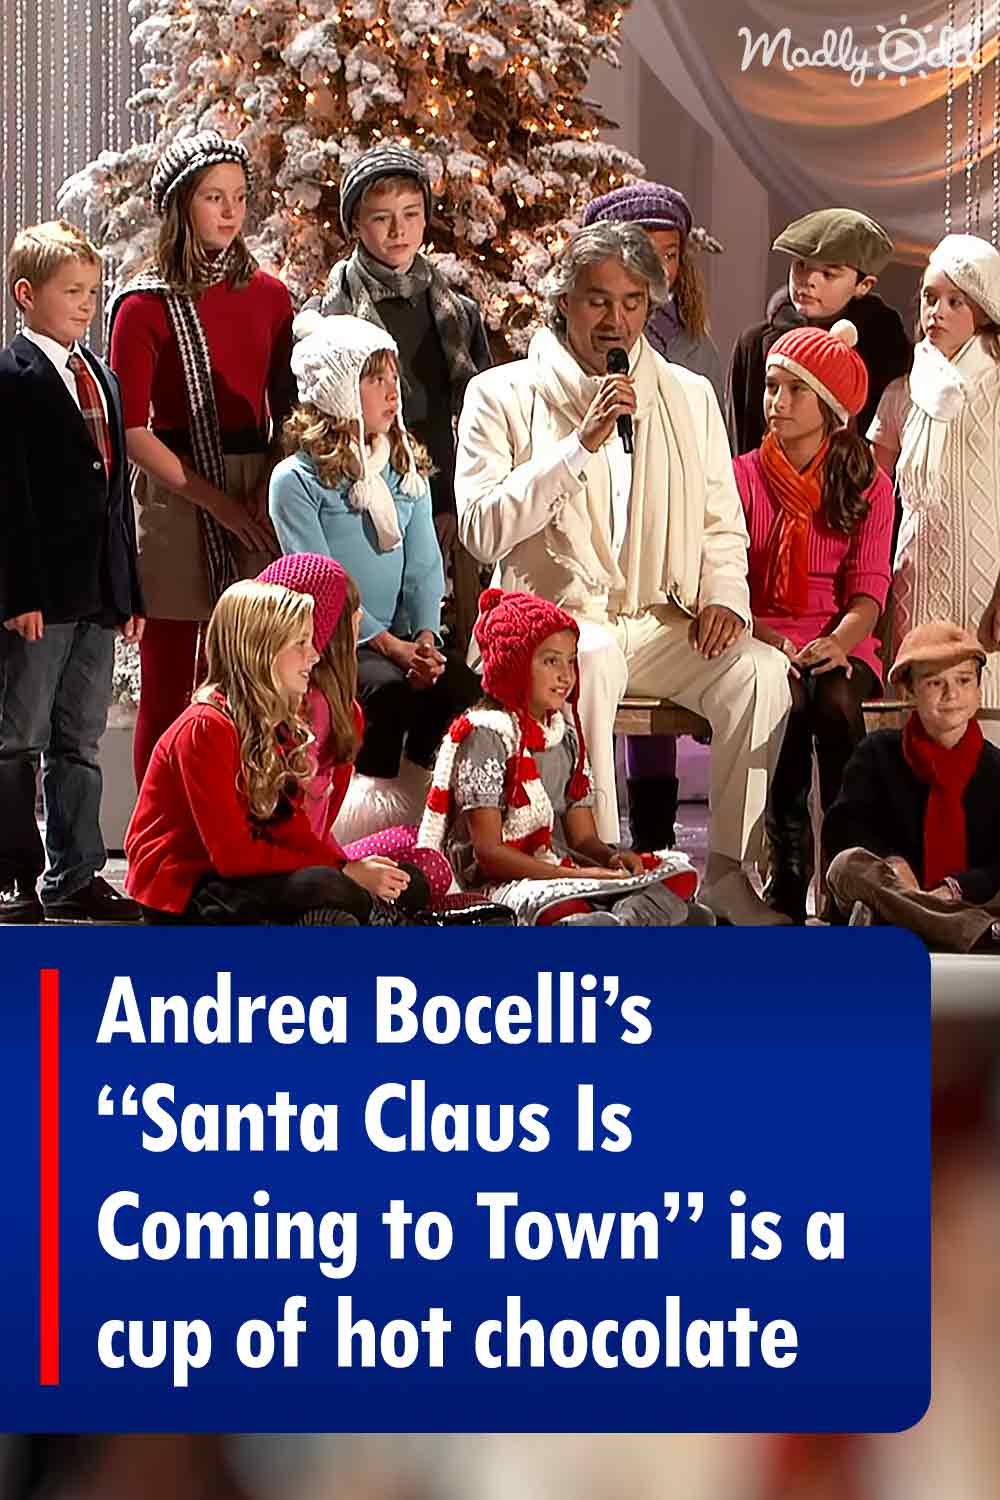 Andrea Bocelli’s “Santa Claus Is Coming to Town” is a cup of hot chocolate